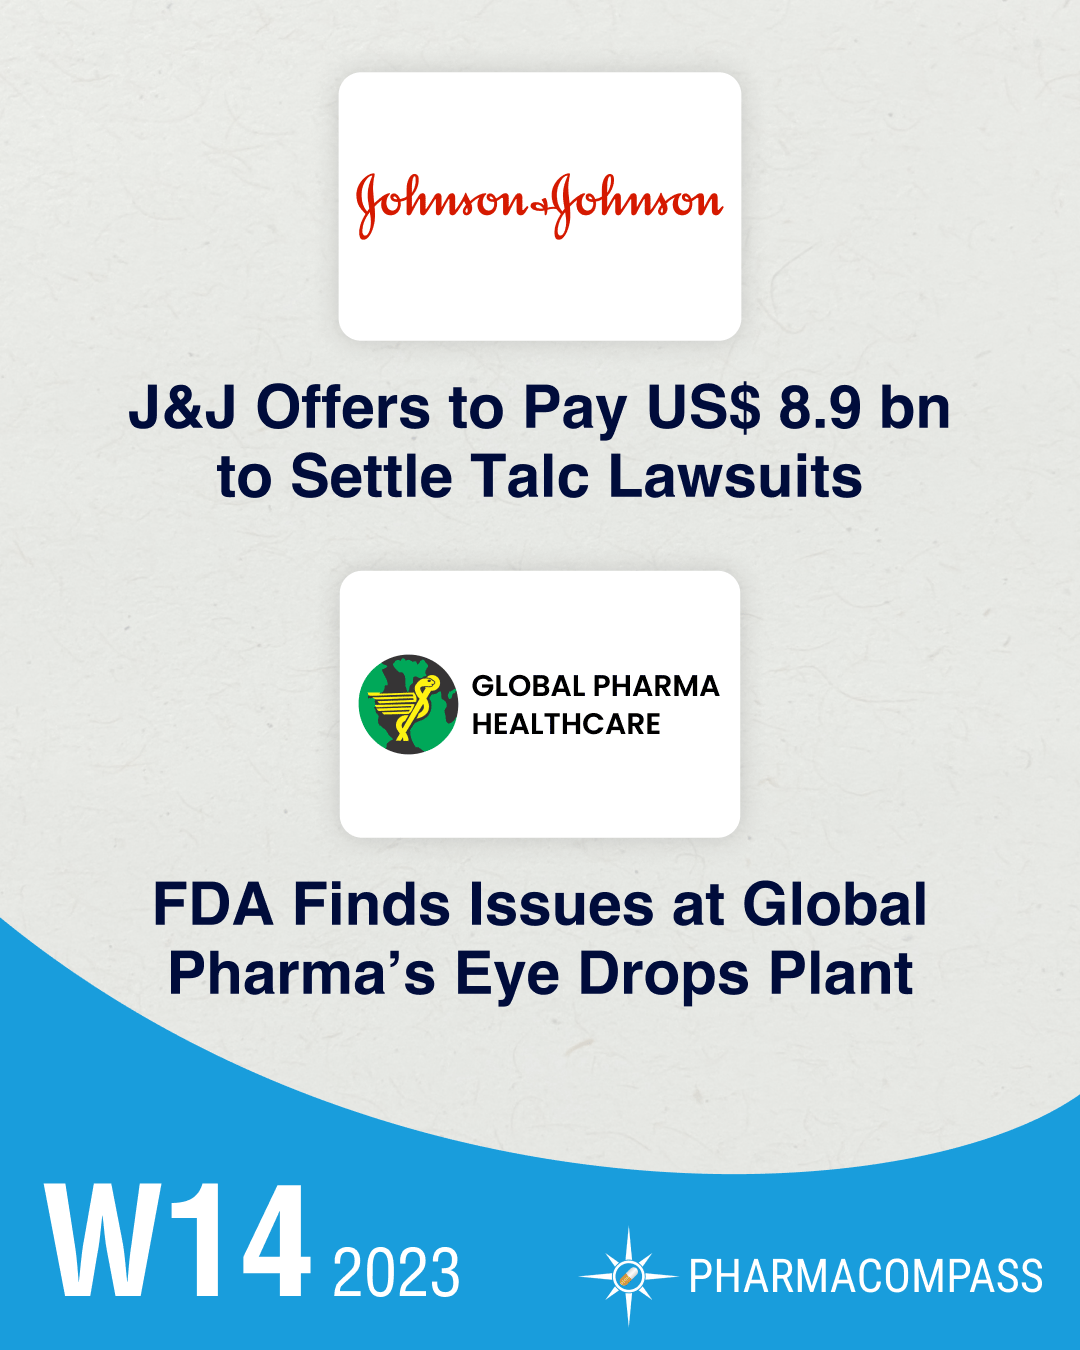 J&J offers US$ 8.9 bn to resolve talc lawsuits; Global Pharma violated safety norms, says FDA